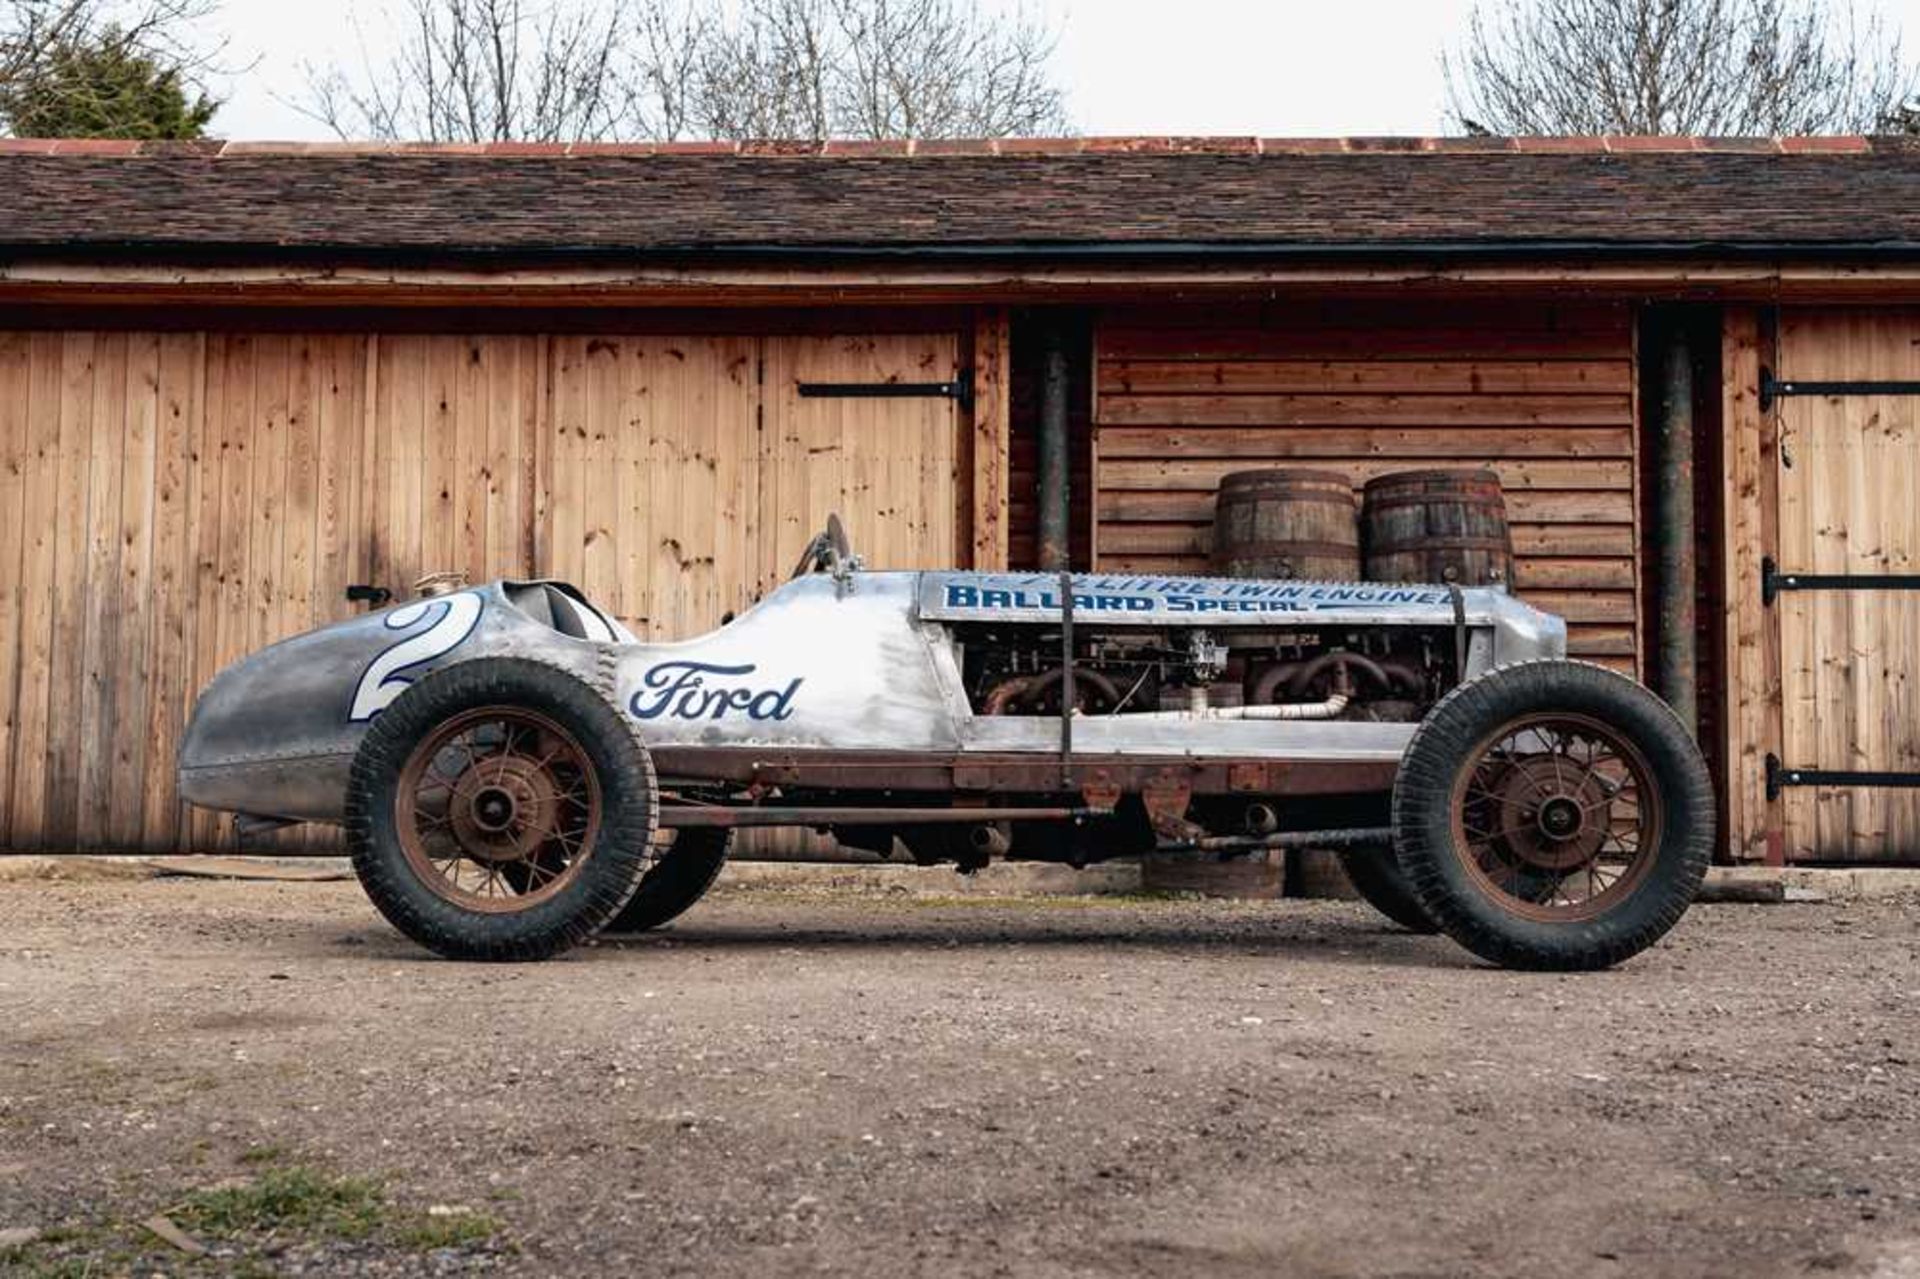 1930 Ford Model A "The Ballard Special" Speedster One off, bespoke built twin-engined pre-war racing - Image 3 of 94